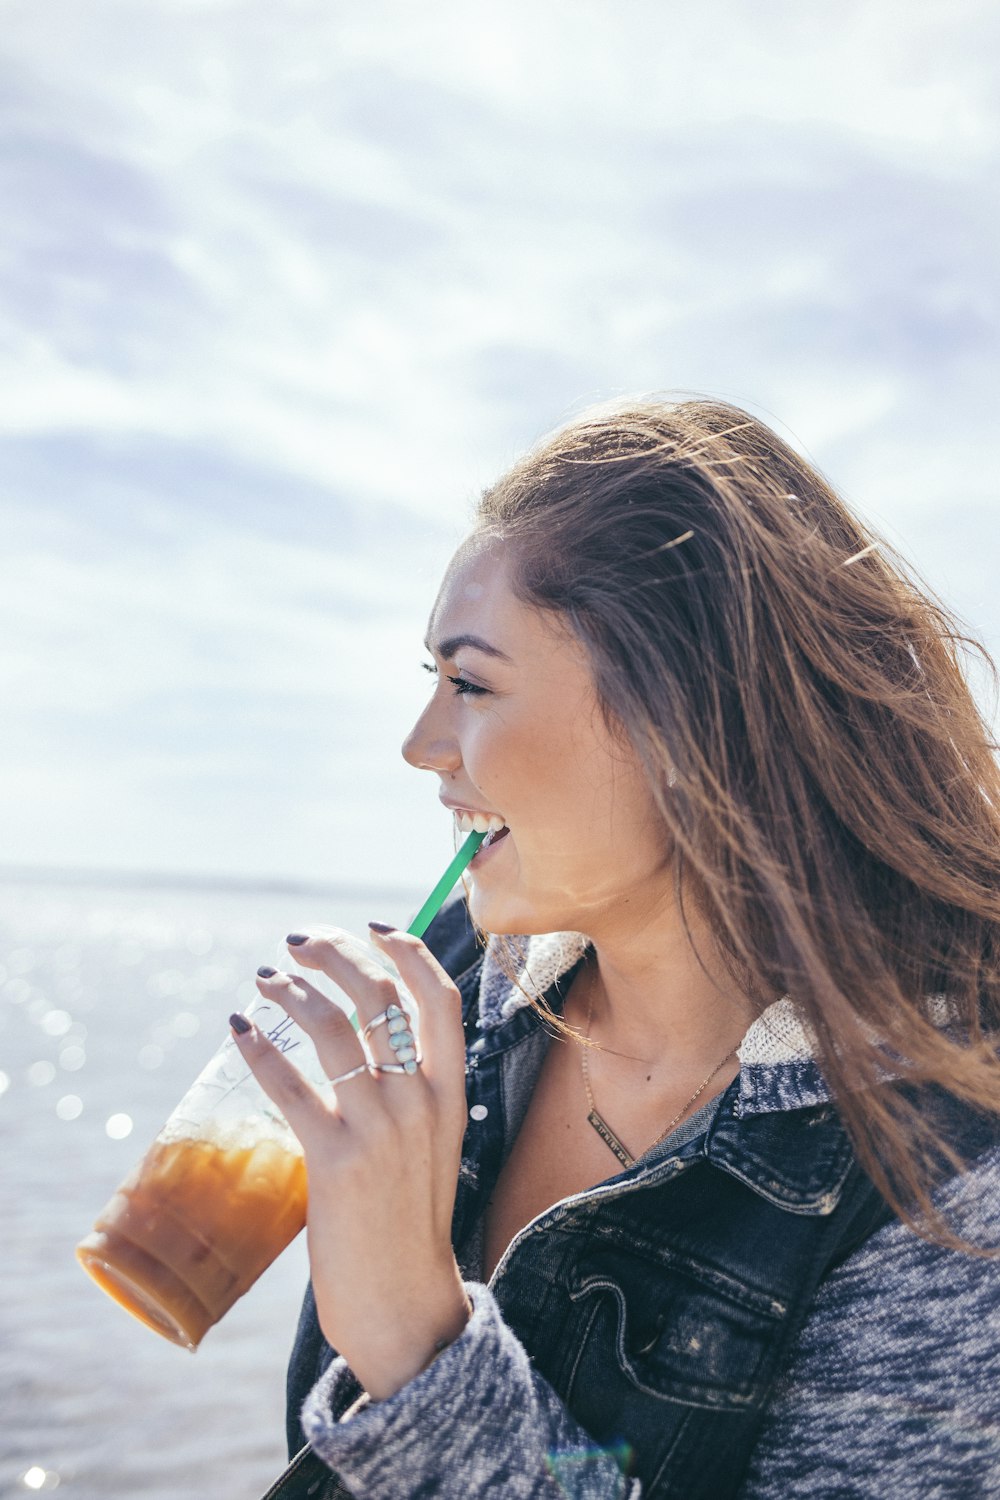 woman wearing black and grey jacket holding glass cup while drinking near body of water during daytime, wake and bake tips